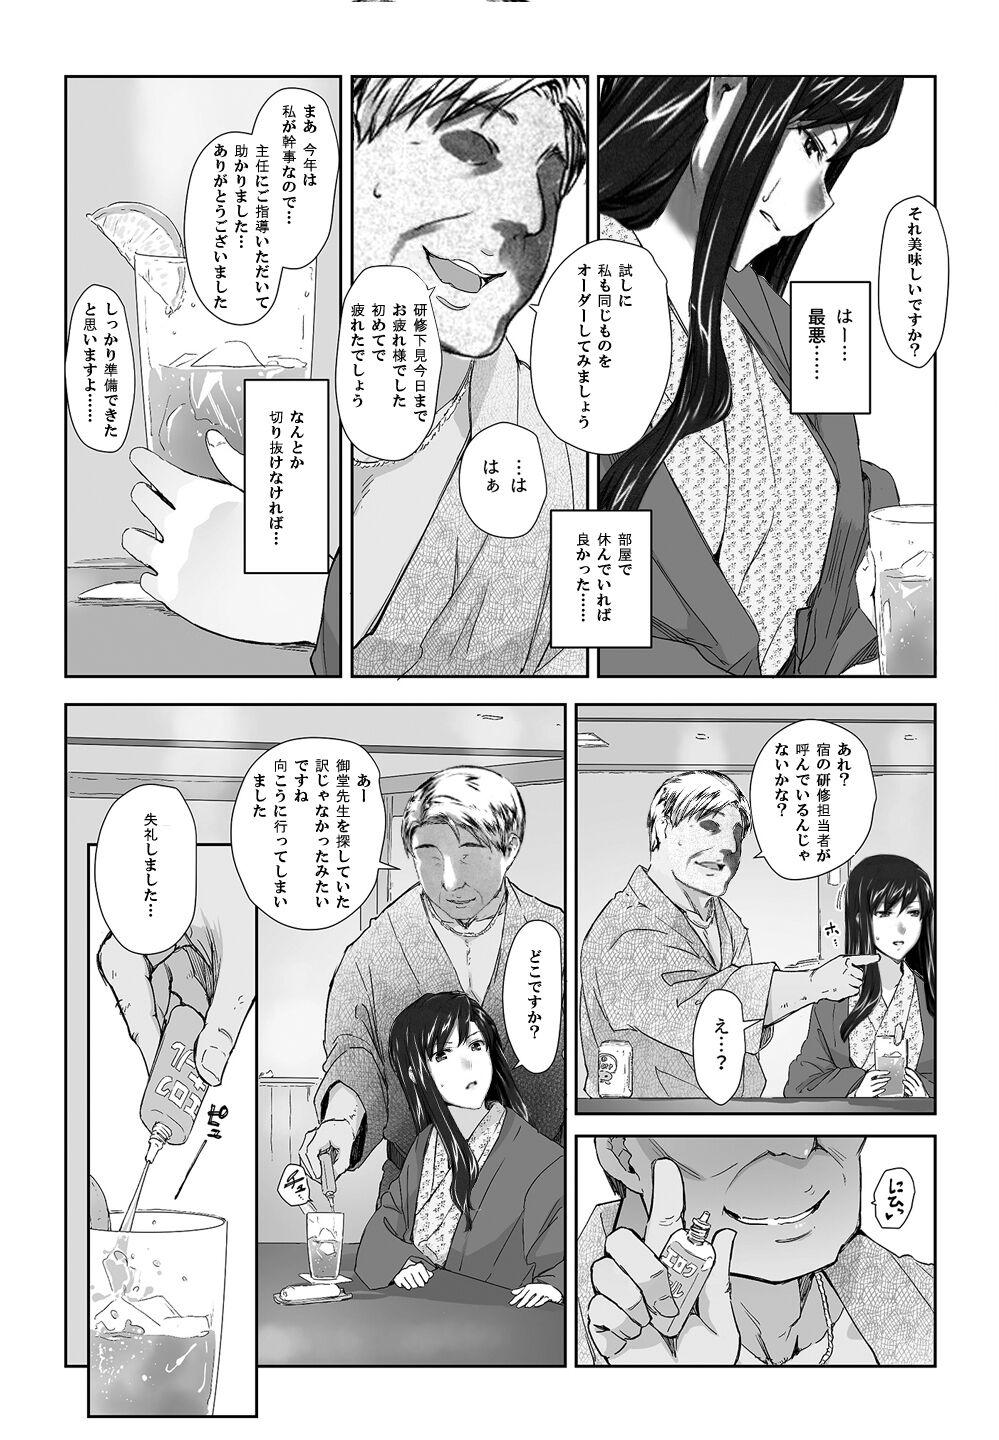 Hardon Sakiko-san in delusion Vol.8 ~Sakiko-san's circumstance at an educational training Route3~ (collage) (Continue to “First day of study trip” (page 42) of Vol.1) - Original Bunda Grande - Page 4